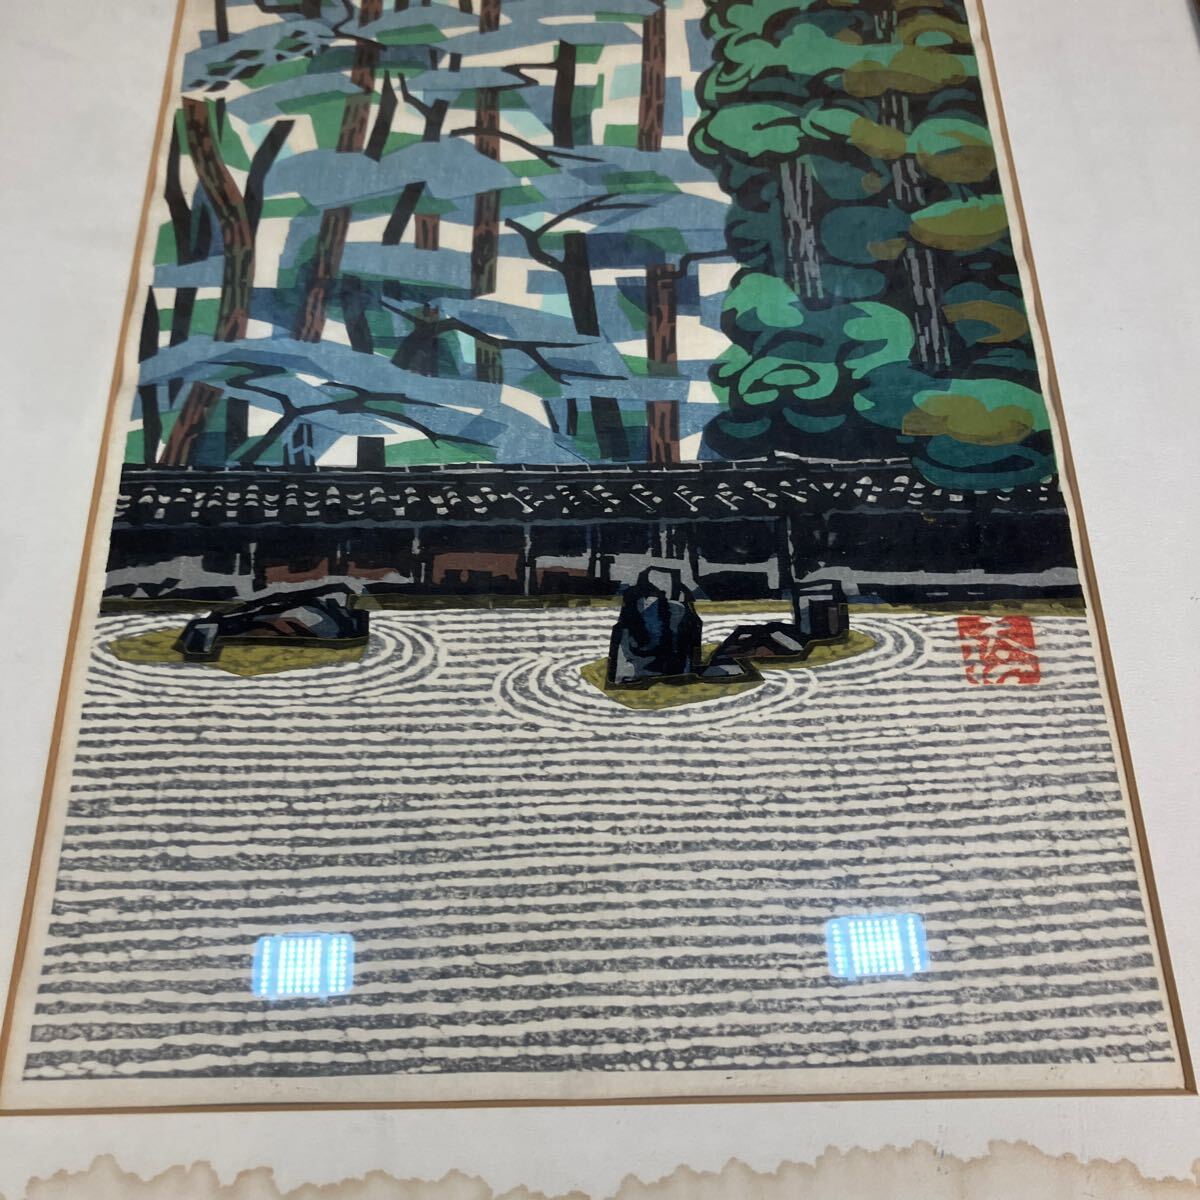 1 jpy ~/ genuineness guarantee / Hashimoto . house / stone garden / woodblock print / picture / art / picture frame / frame length 71cm width 59.5cm/ used 